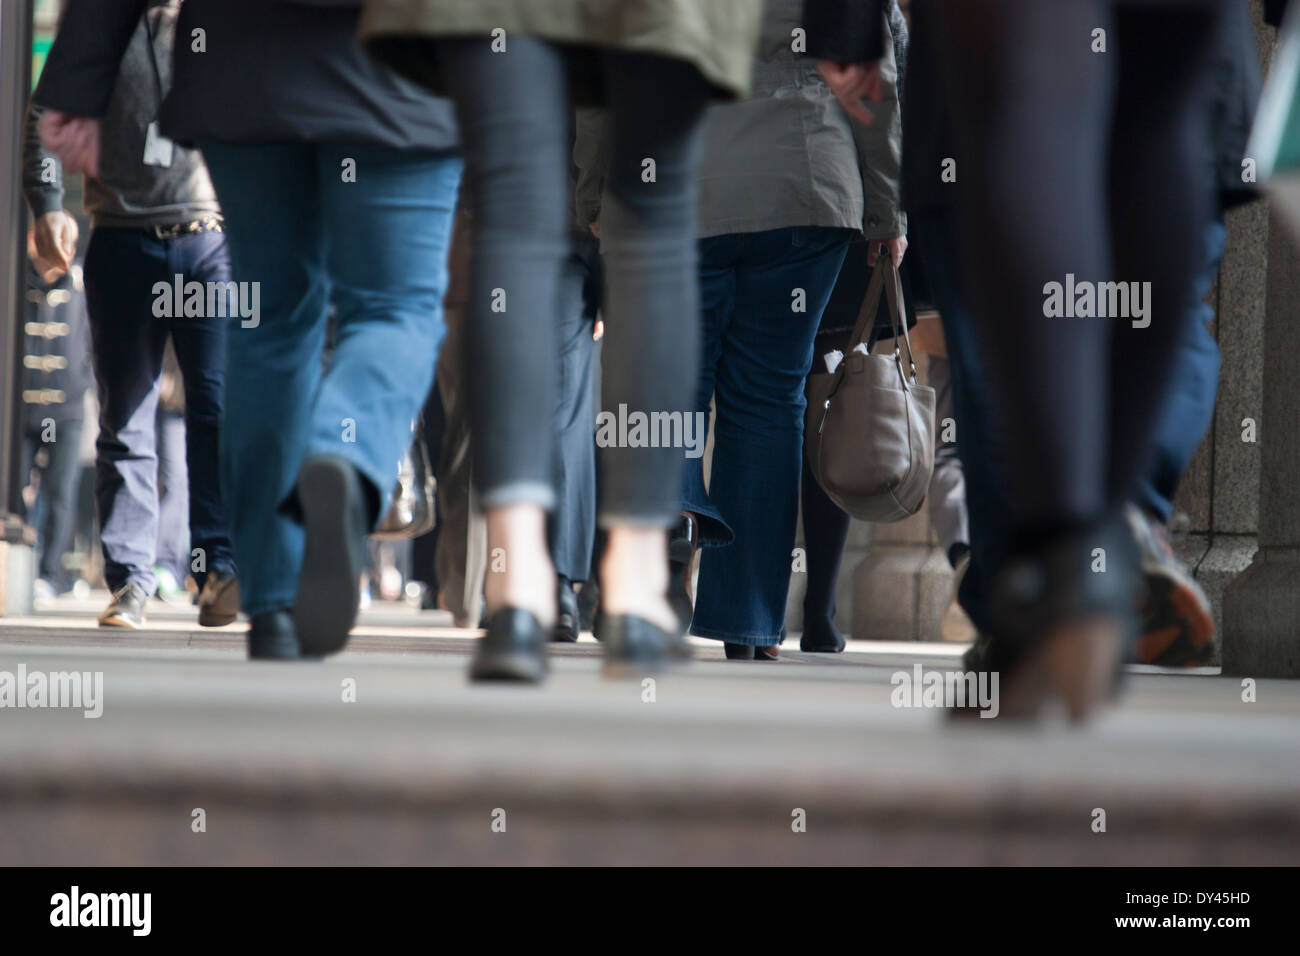 legs of city workers during morning rush hour London Stock Photo